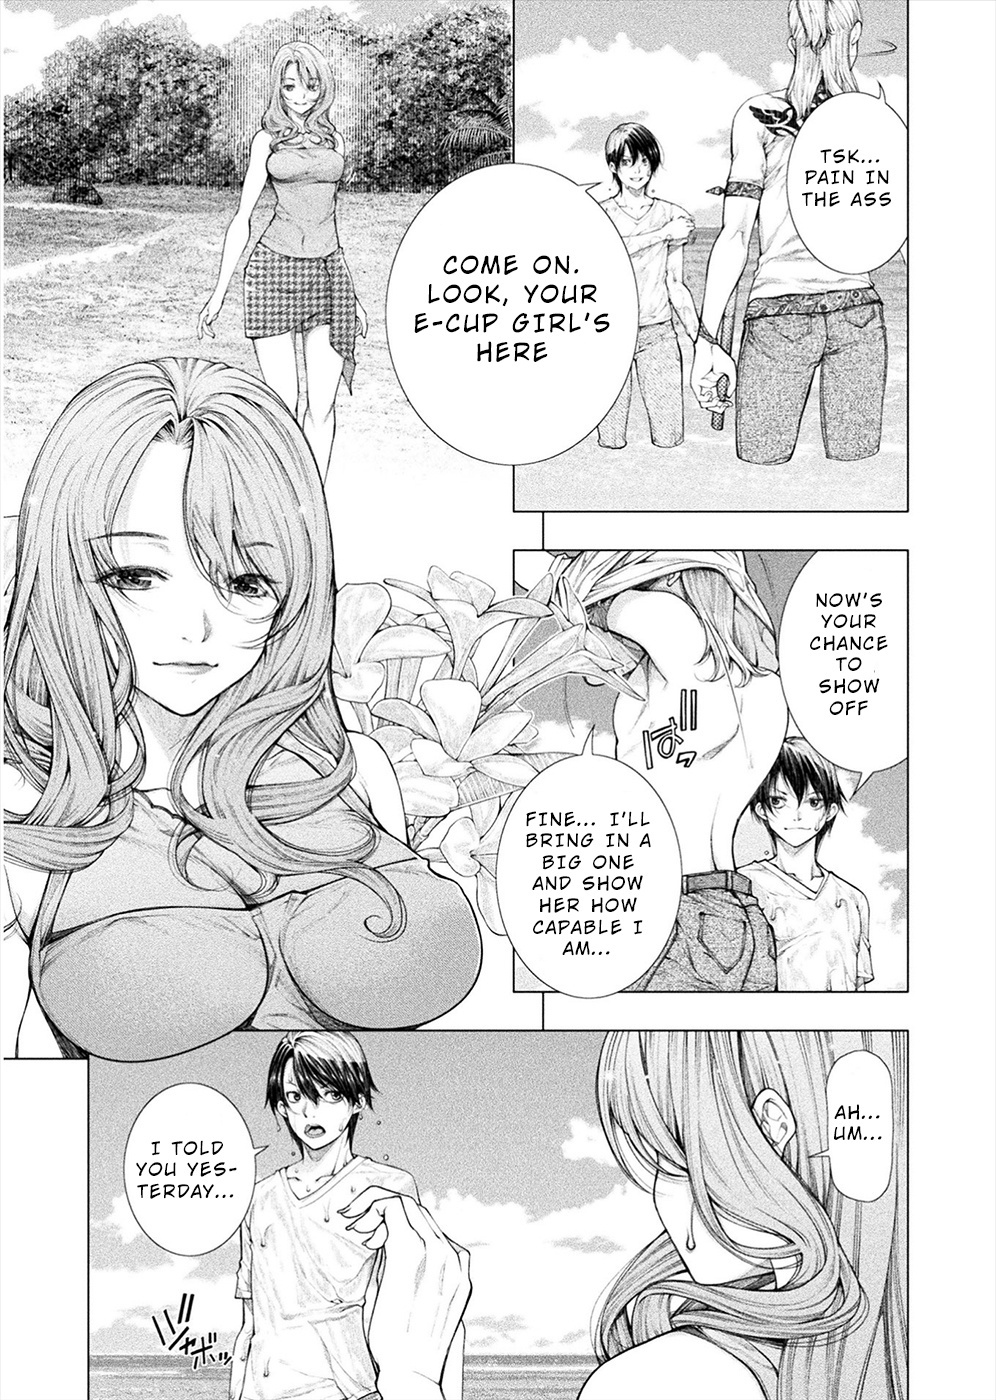 Lovetrap Island - Passion In Distant Lands - Chapter 4 #9